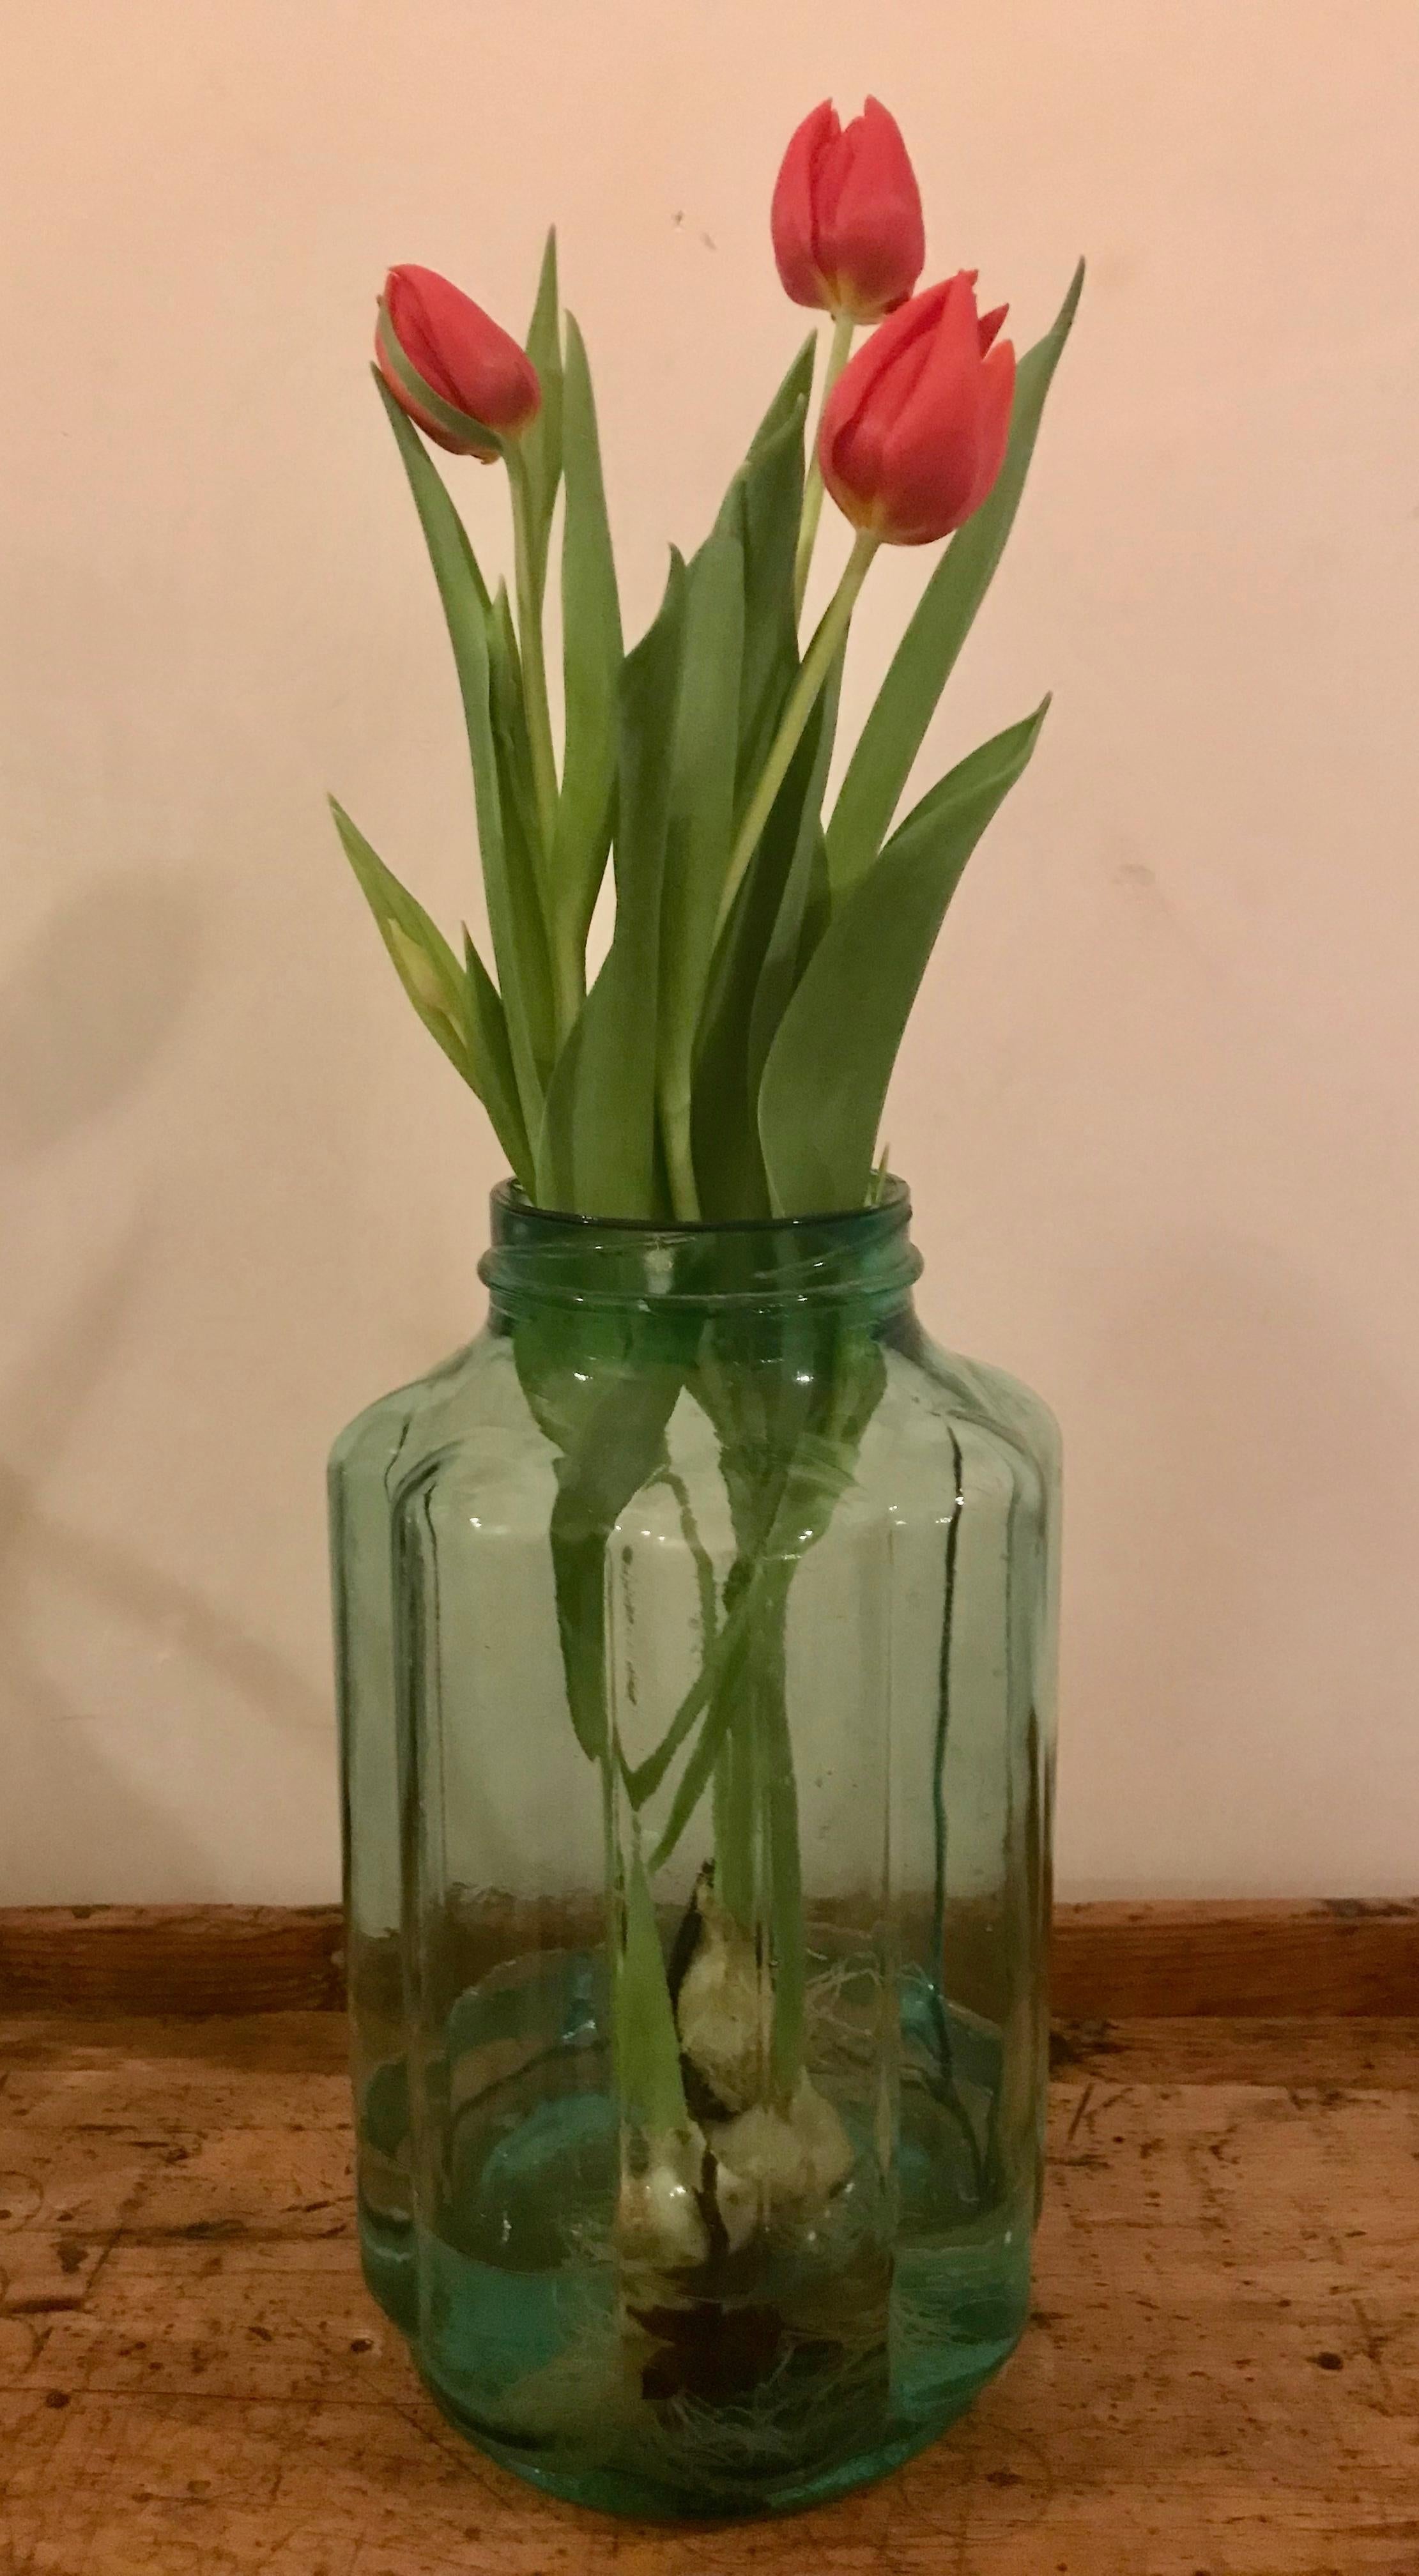 These Spanish vintage green glass jars were used to store pickled peppers.
They have a very unique bulbous ribbed shape and vary in color from light green to the lightest shade of turquoise. They would make great hanging lanterns!
 